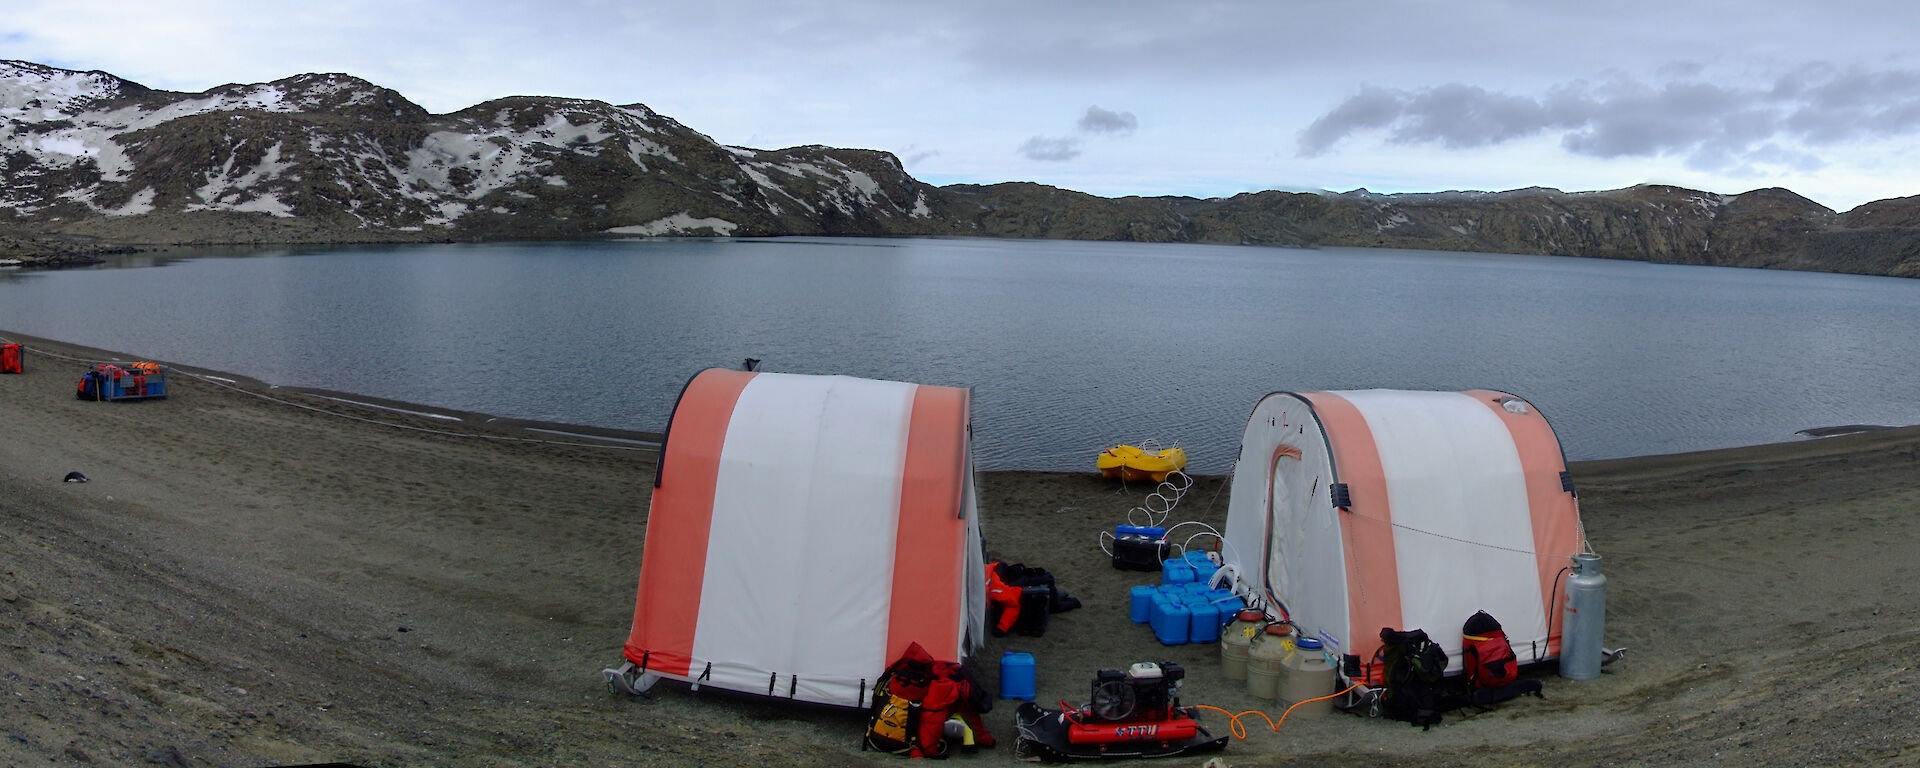 A panorama of the Deep Lake campsite where the University of New South Wales scientific team discovered a community of promiscuous haloarchaea.